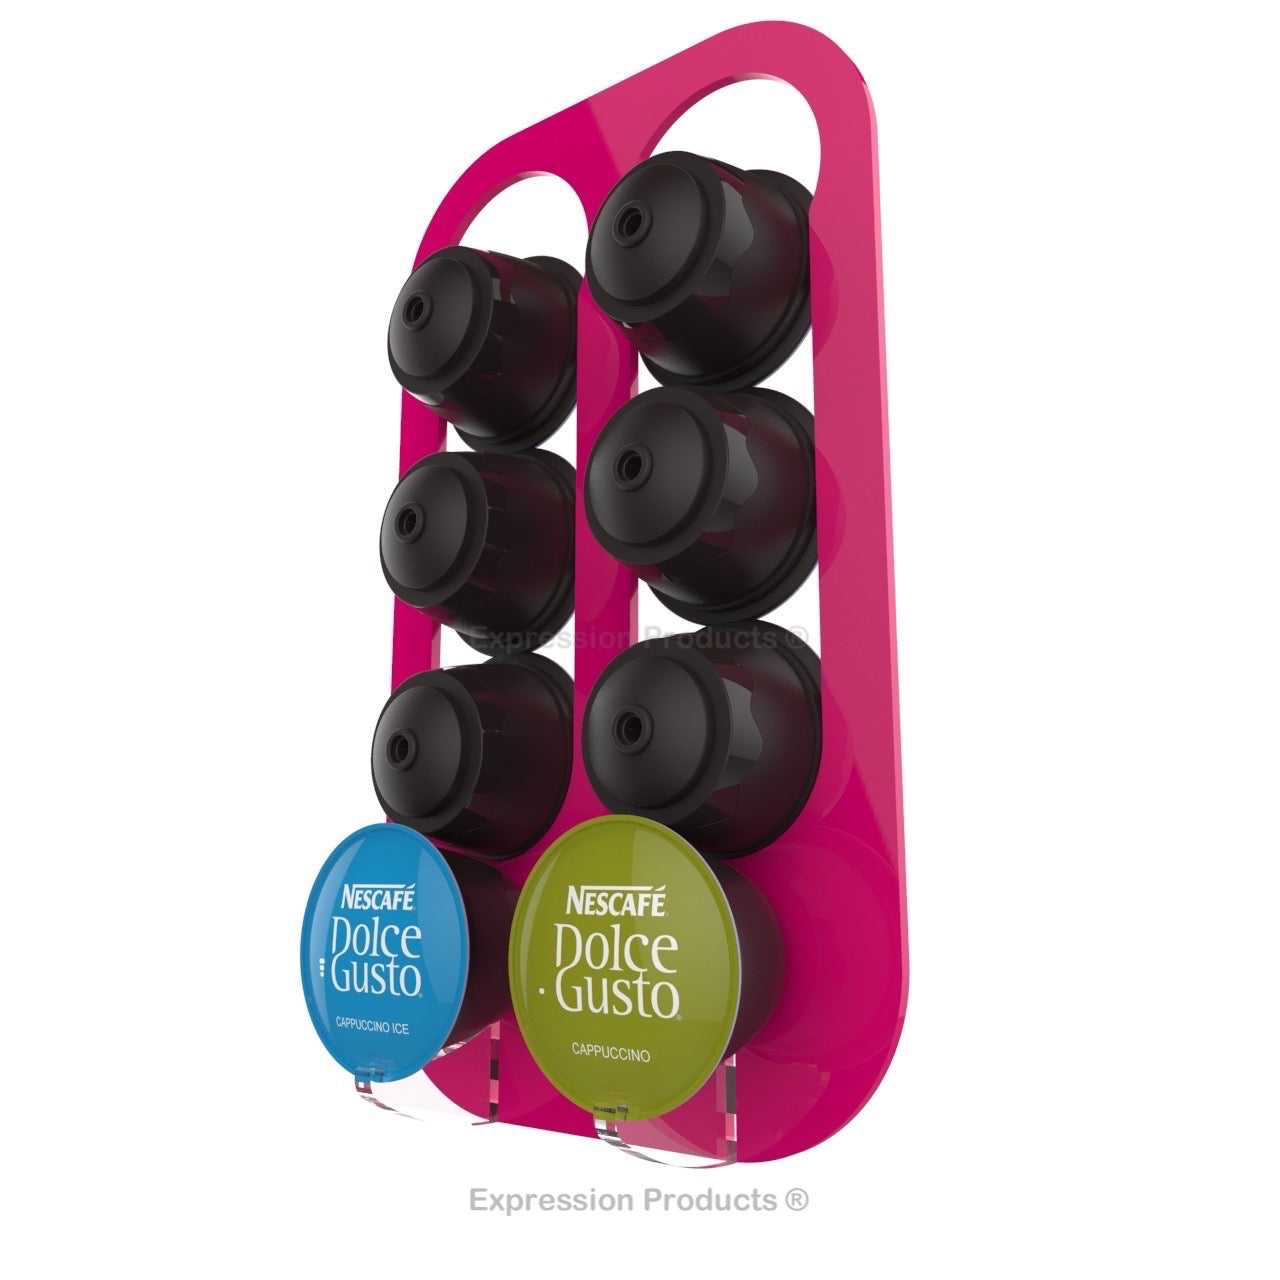 Dolce gusto coffee pod holder, wall mounted, half height.  Shown in pink holding 8 pods